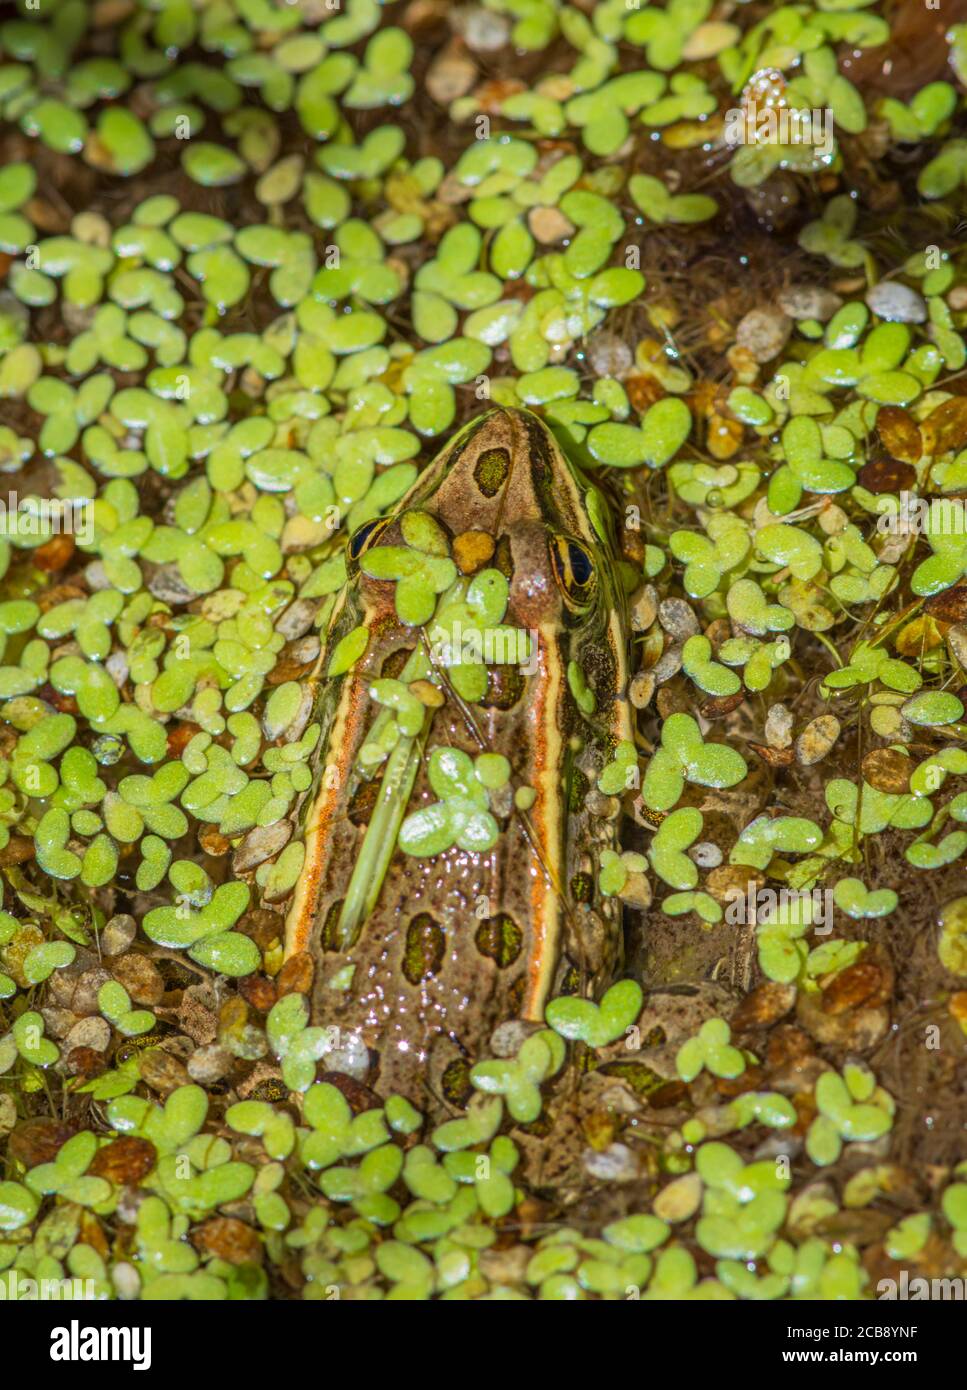 Plains Leopard frog (Lithobates blairi) hiding among duckweed in wetland cattail marsh, Castle Rock Colorado USA. Photo taken in August. Stock Photo